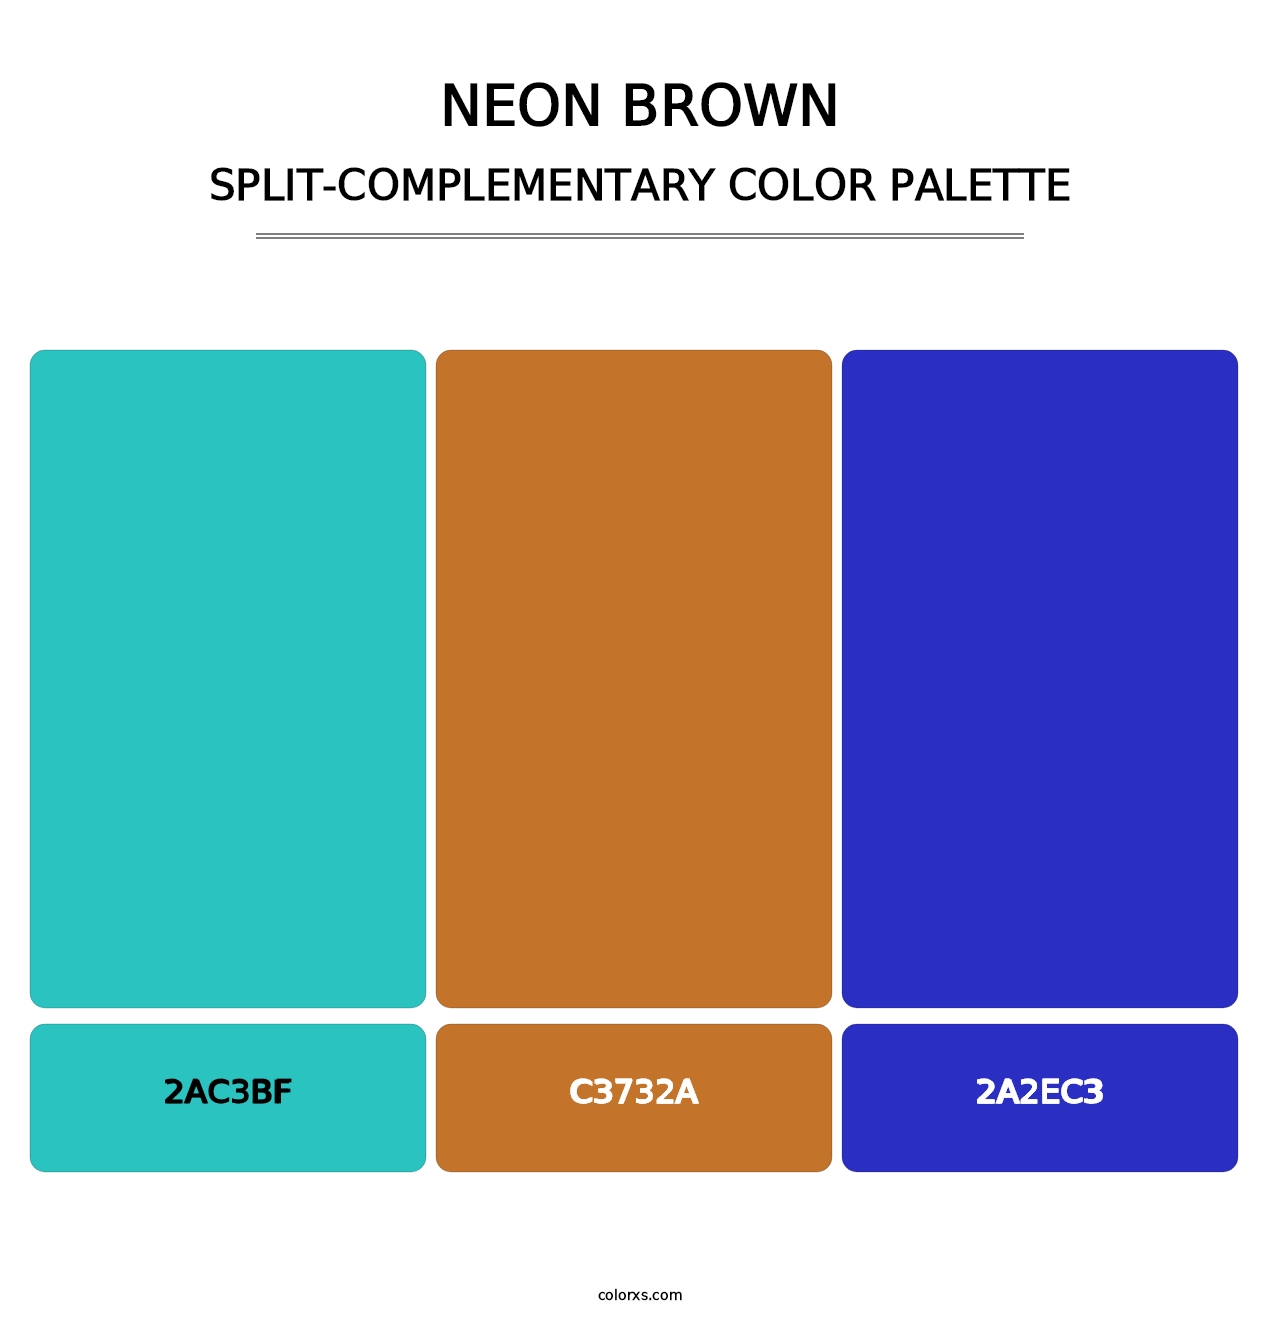 Neon Brown - Split-Complementary Color Palette